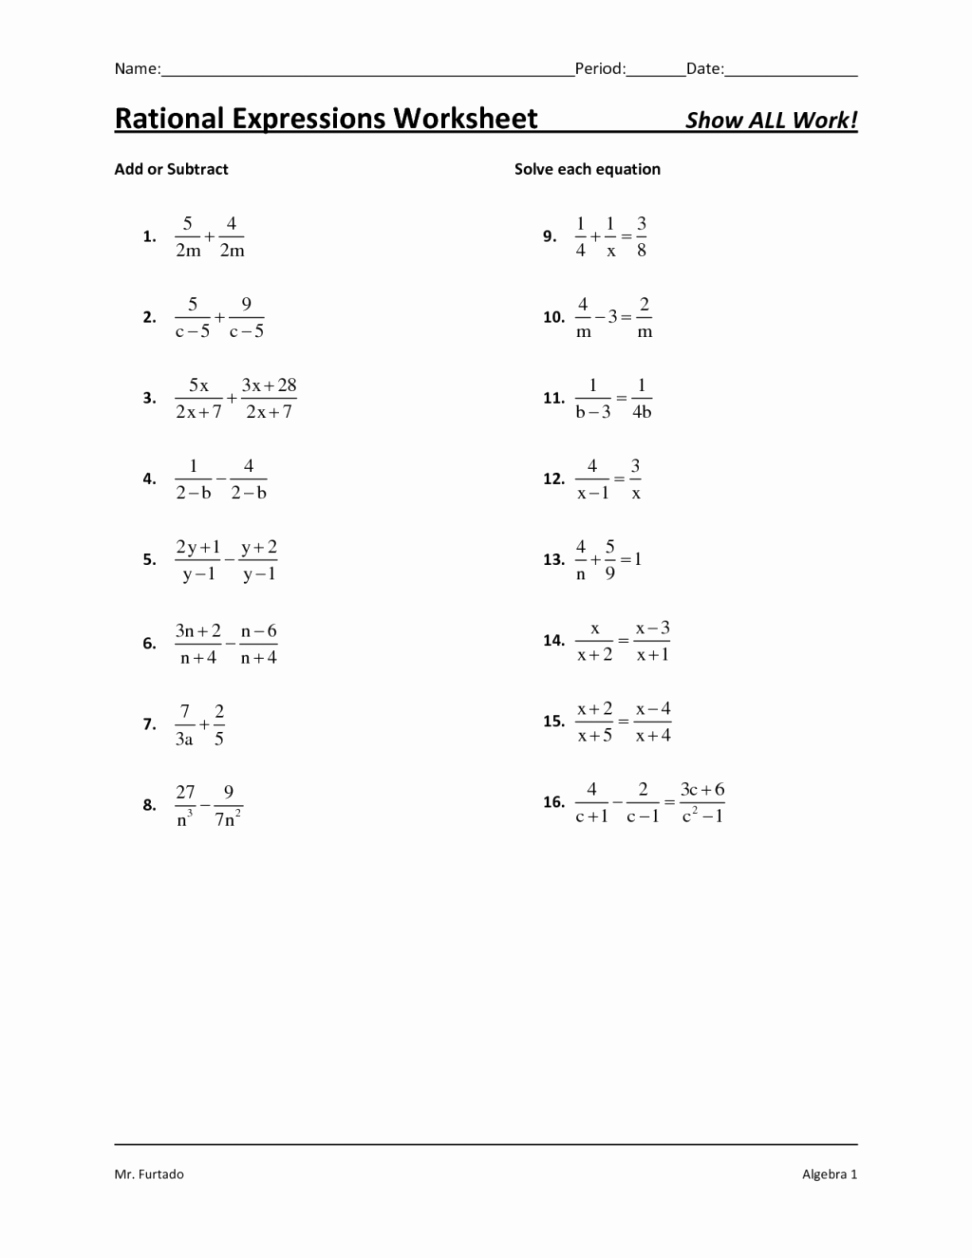 Multiply Rational Expressions Worksheet Best Of Adding Subtracting Multiplying and Dividing Radicals